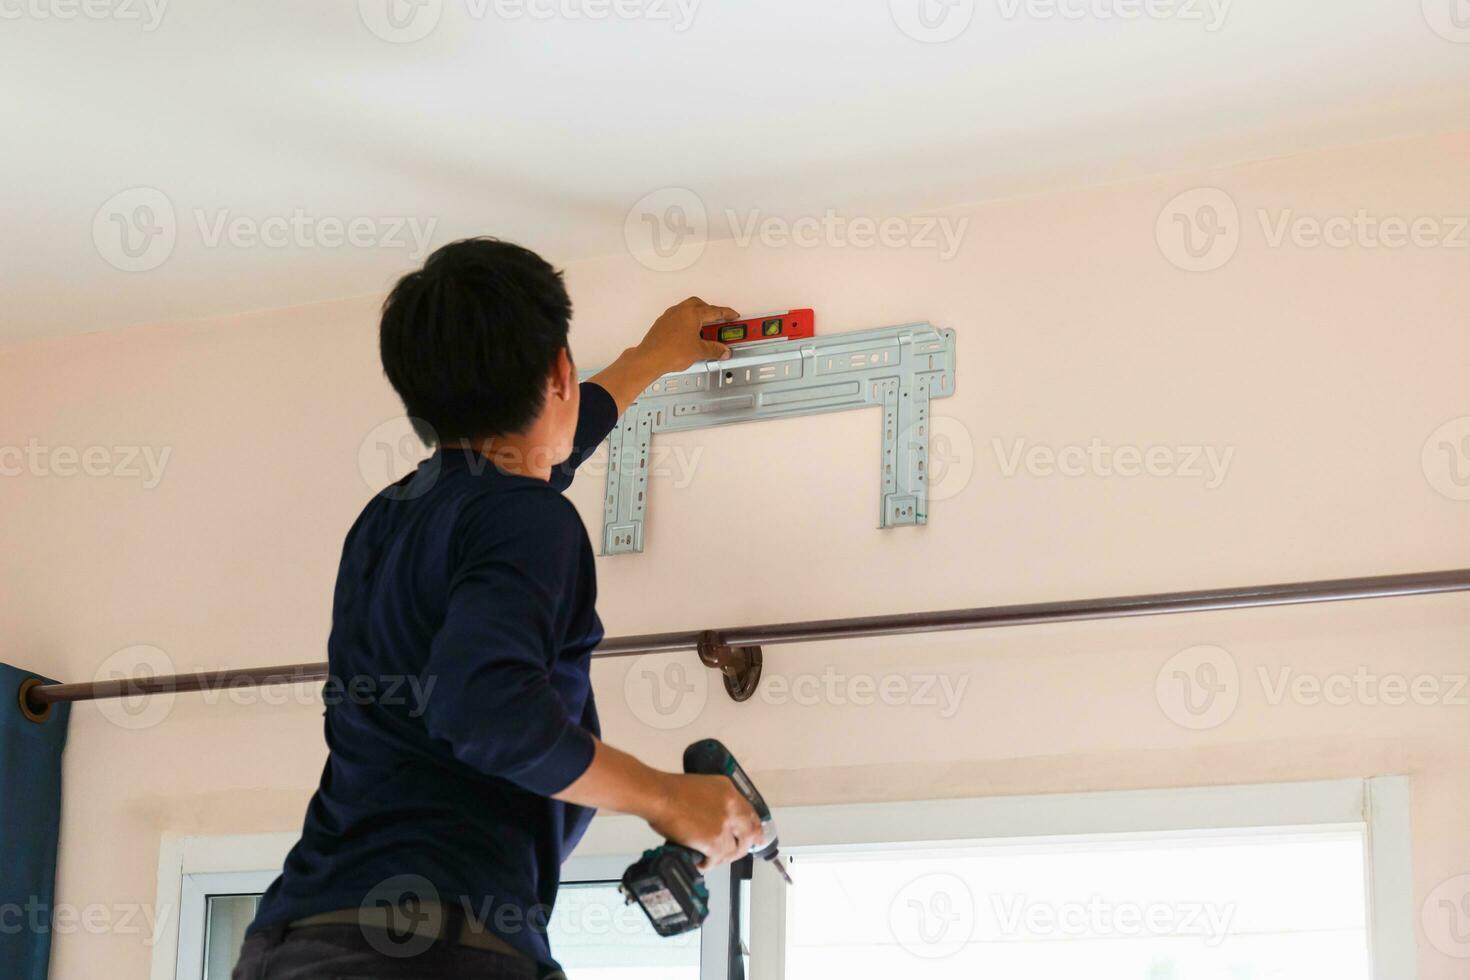 Electrician installing air conditioner unit, Repairman fixing air conditioning, Technician man installing an air conditioner unit in a client house, Maintenance and repairing concepts photo